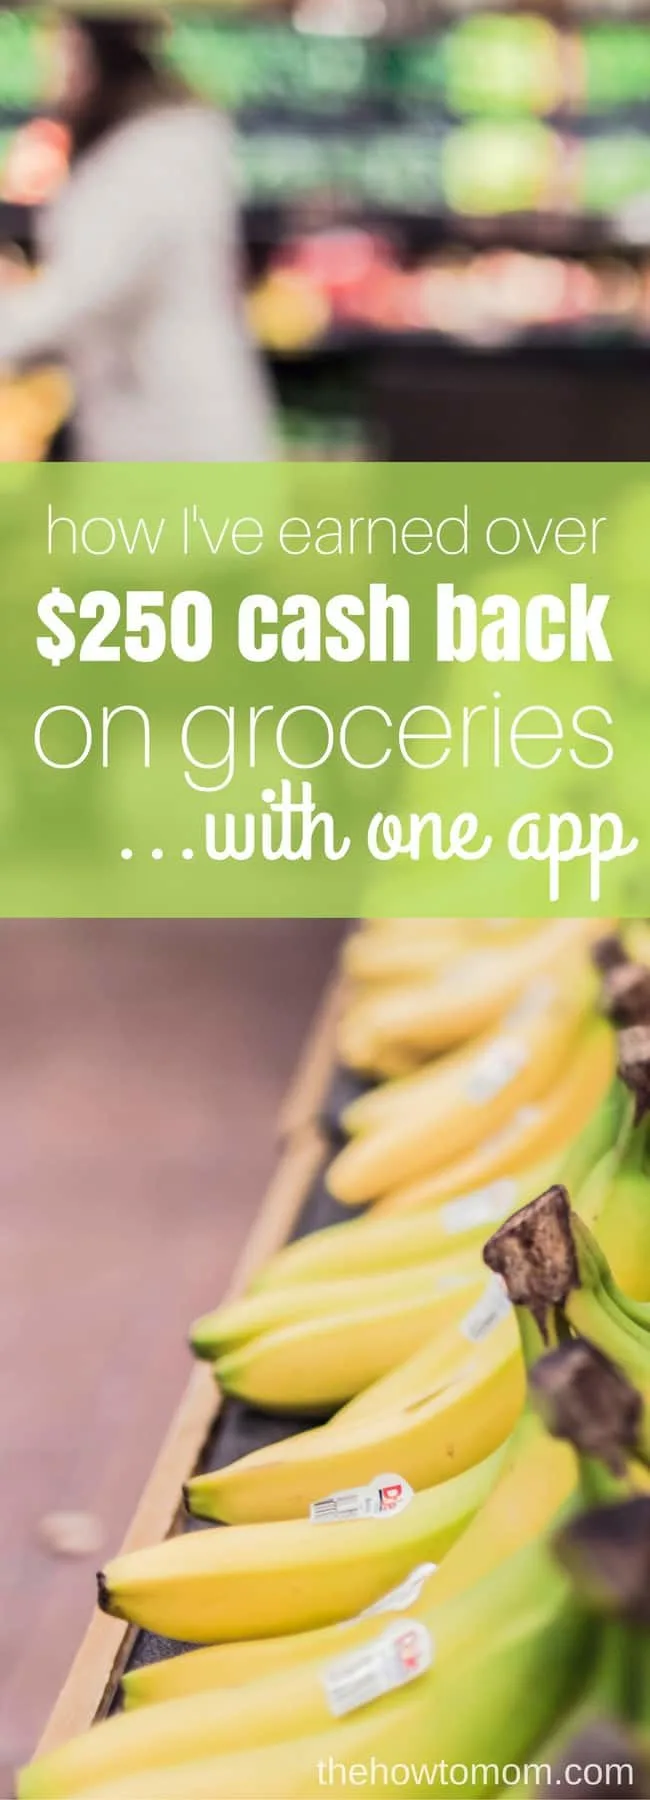 How to get cash back on groceries